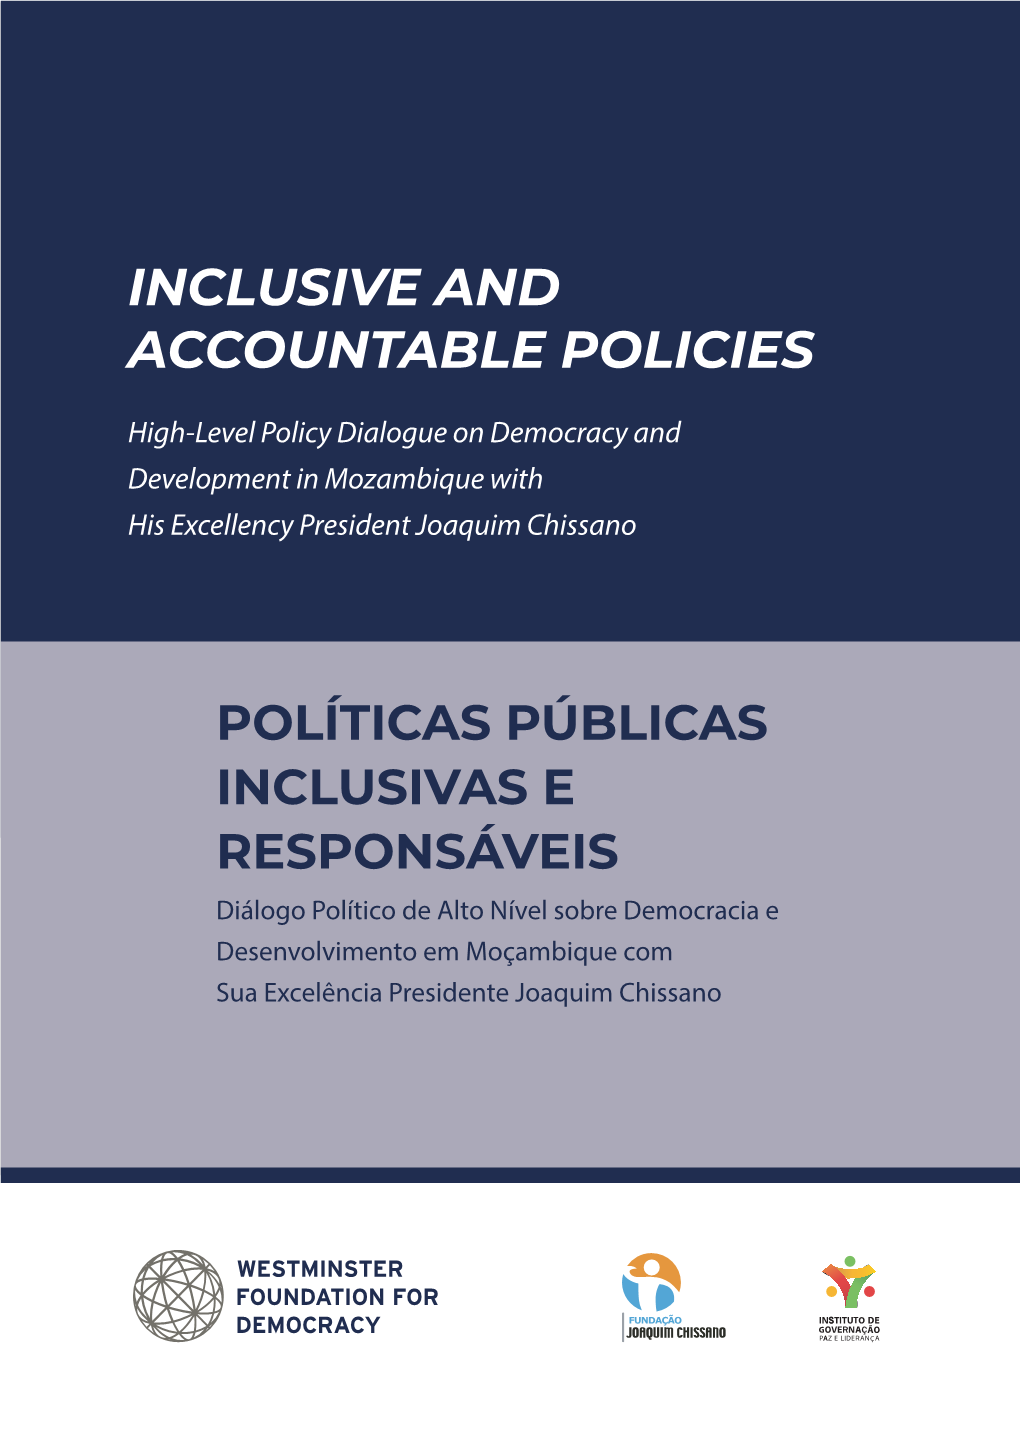 Inclusive and Accountable Policies